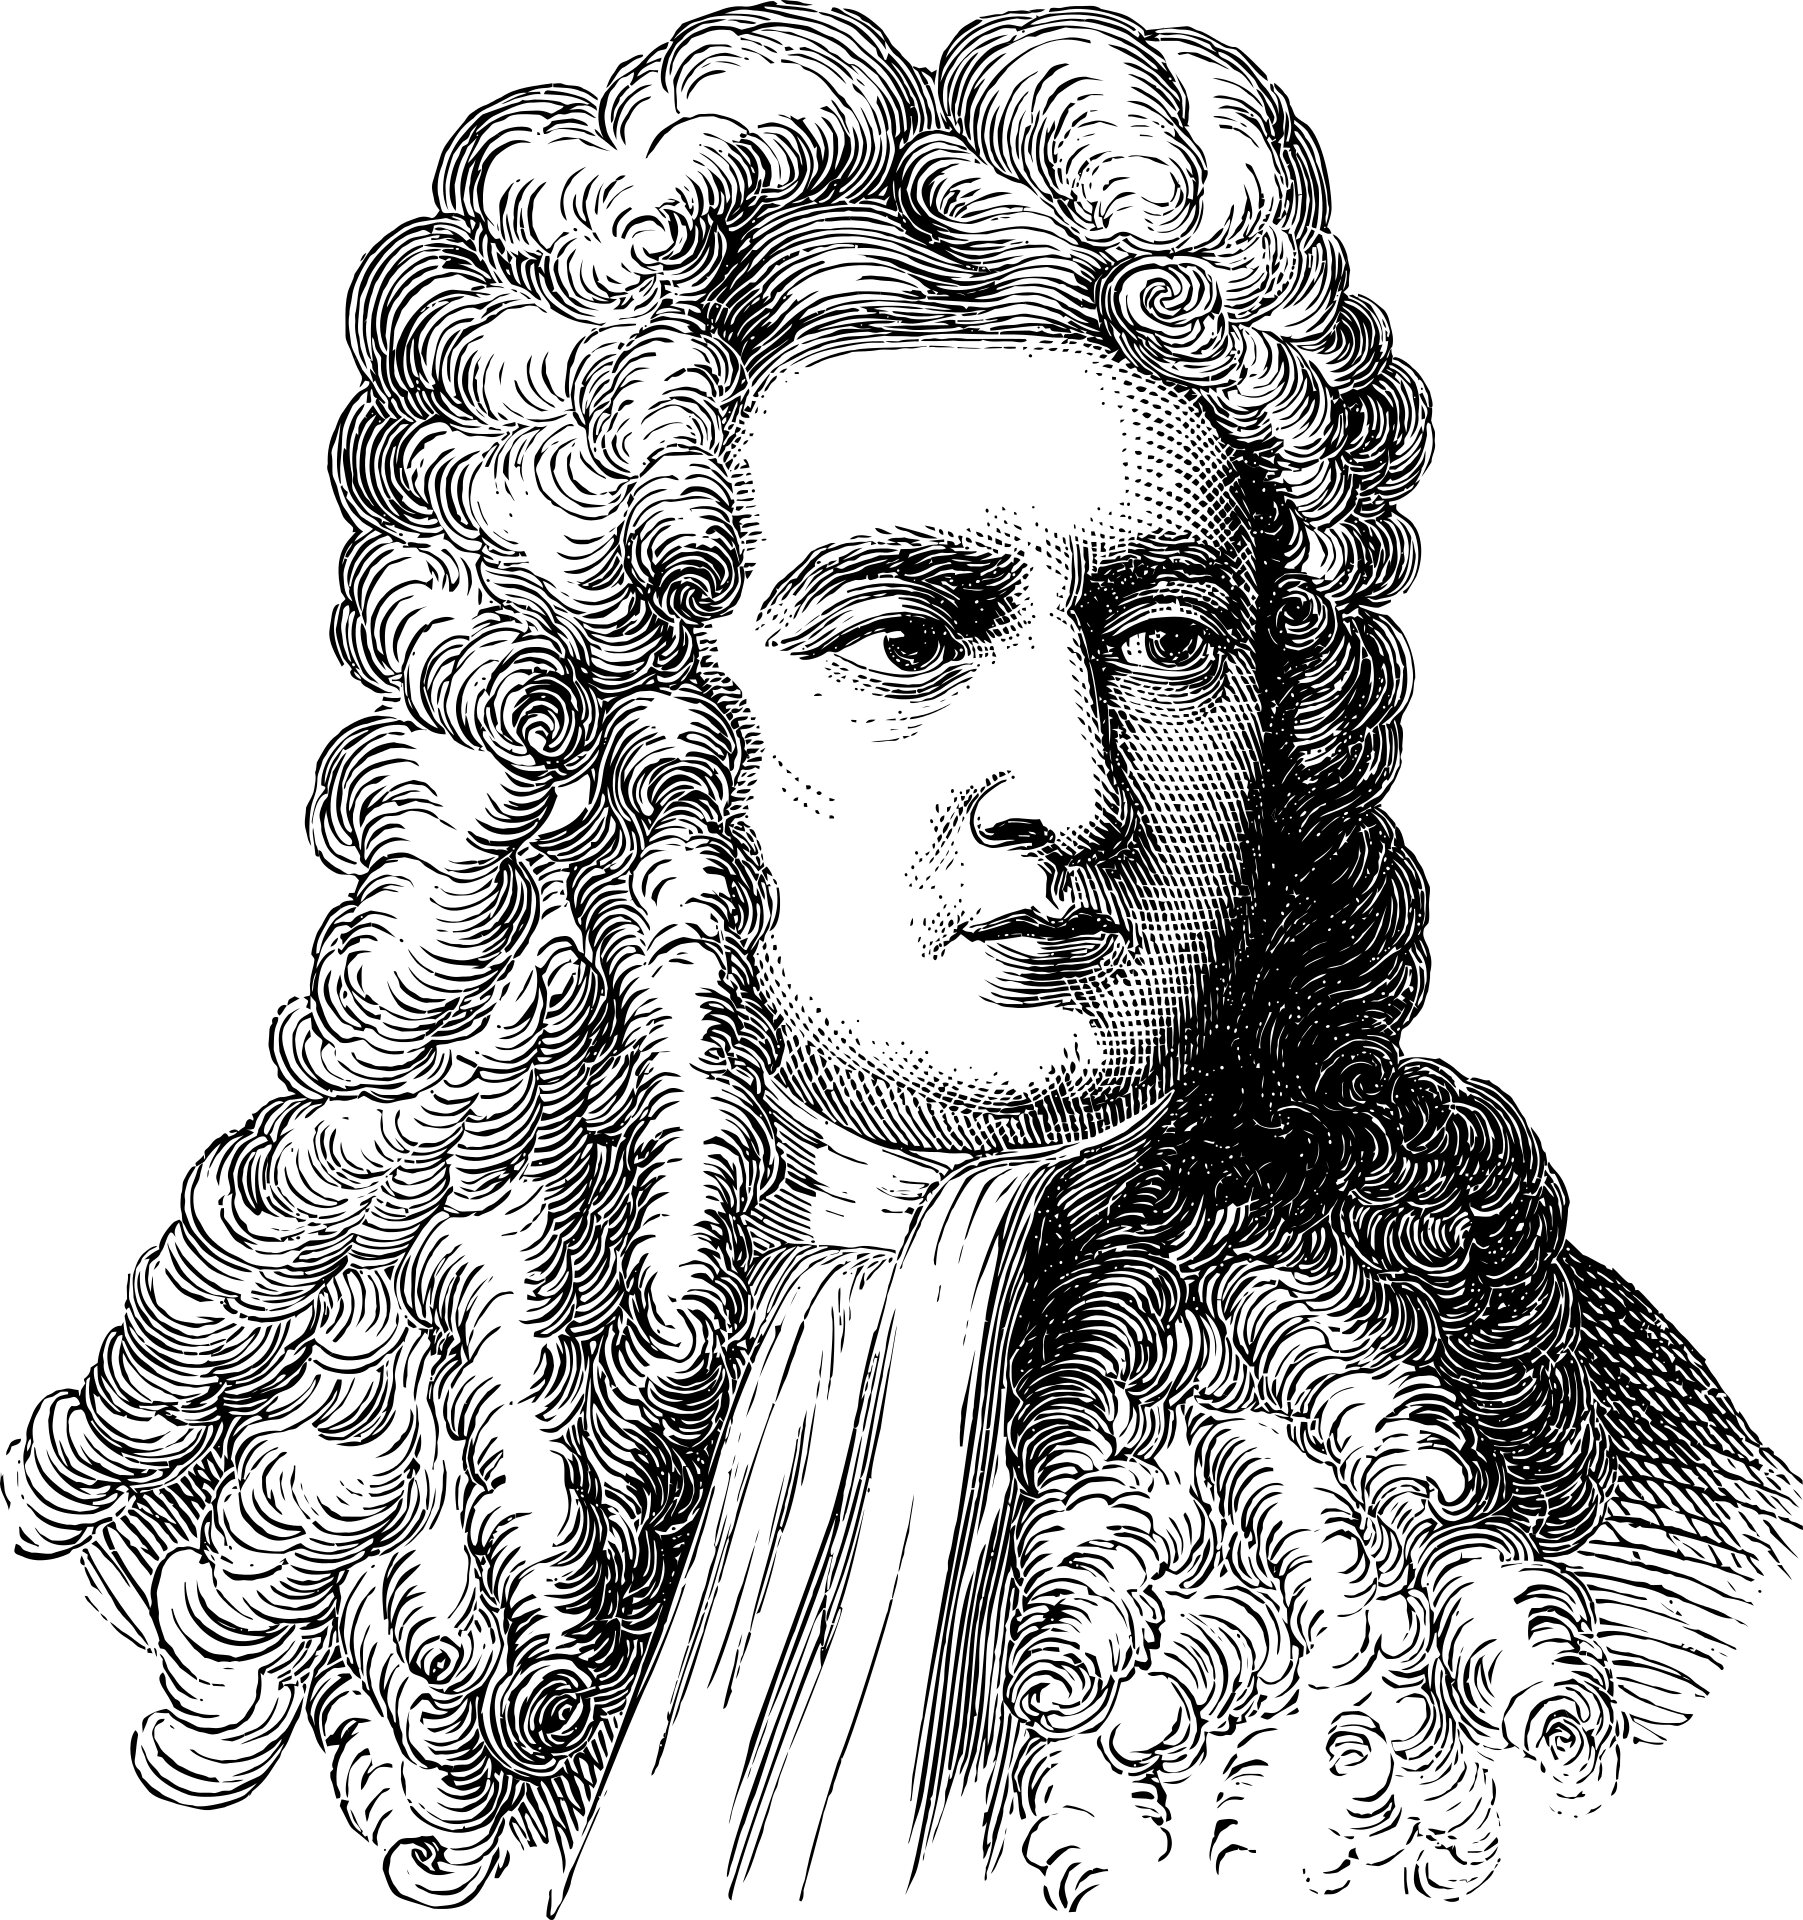 14 Facts About Isaac Newton | Mental Floss